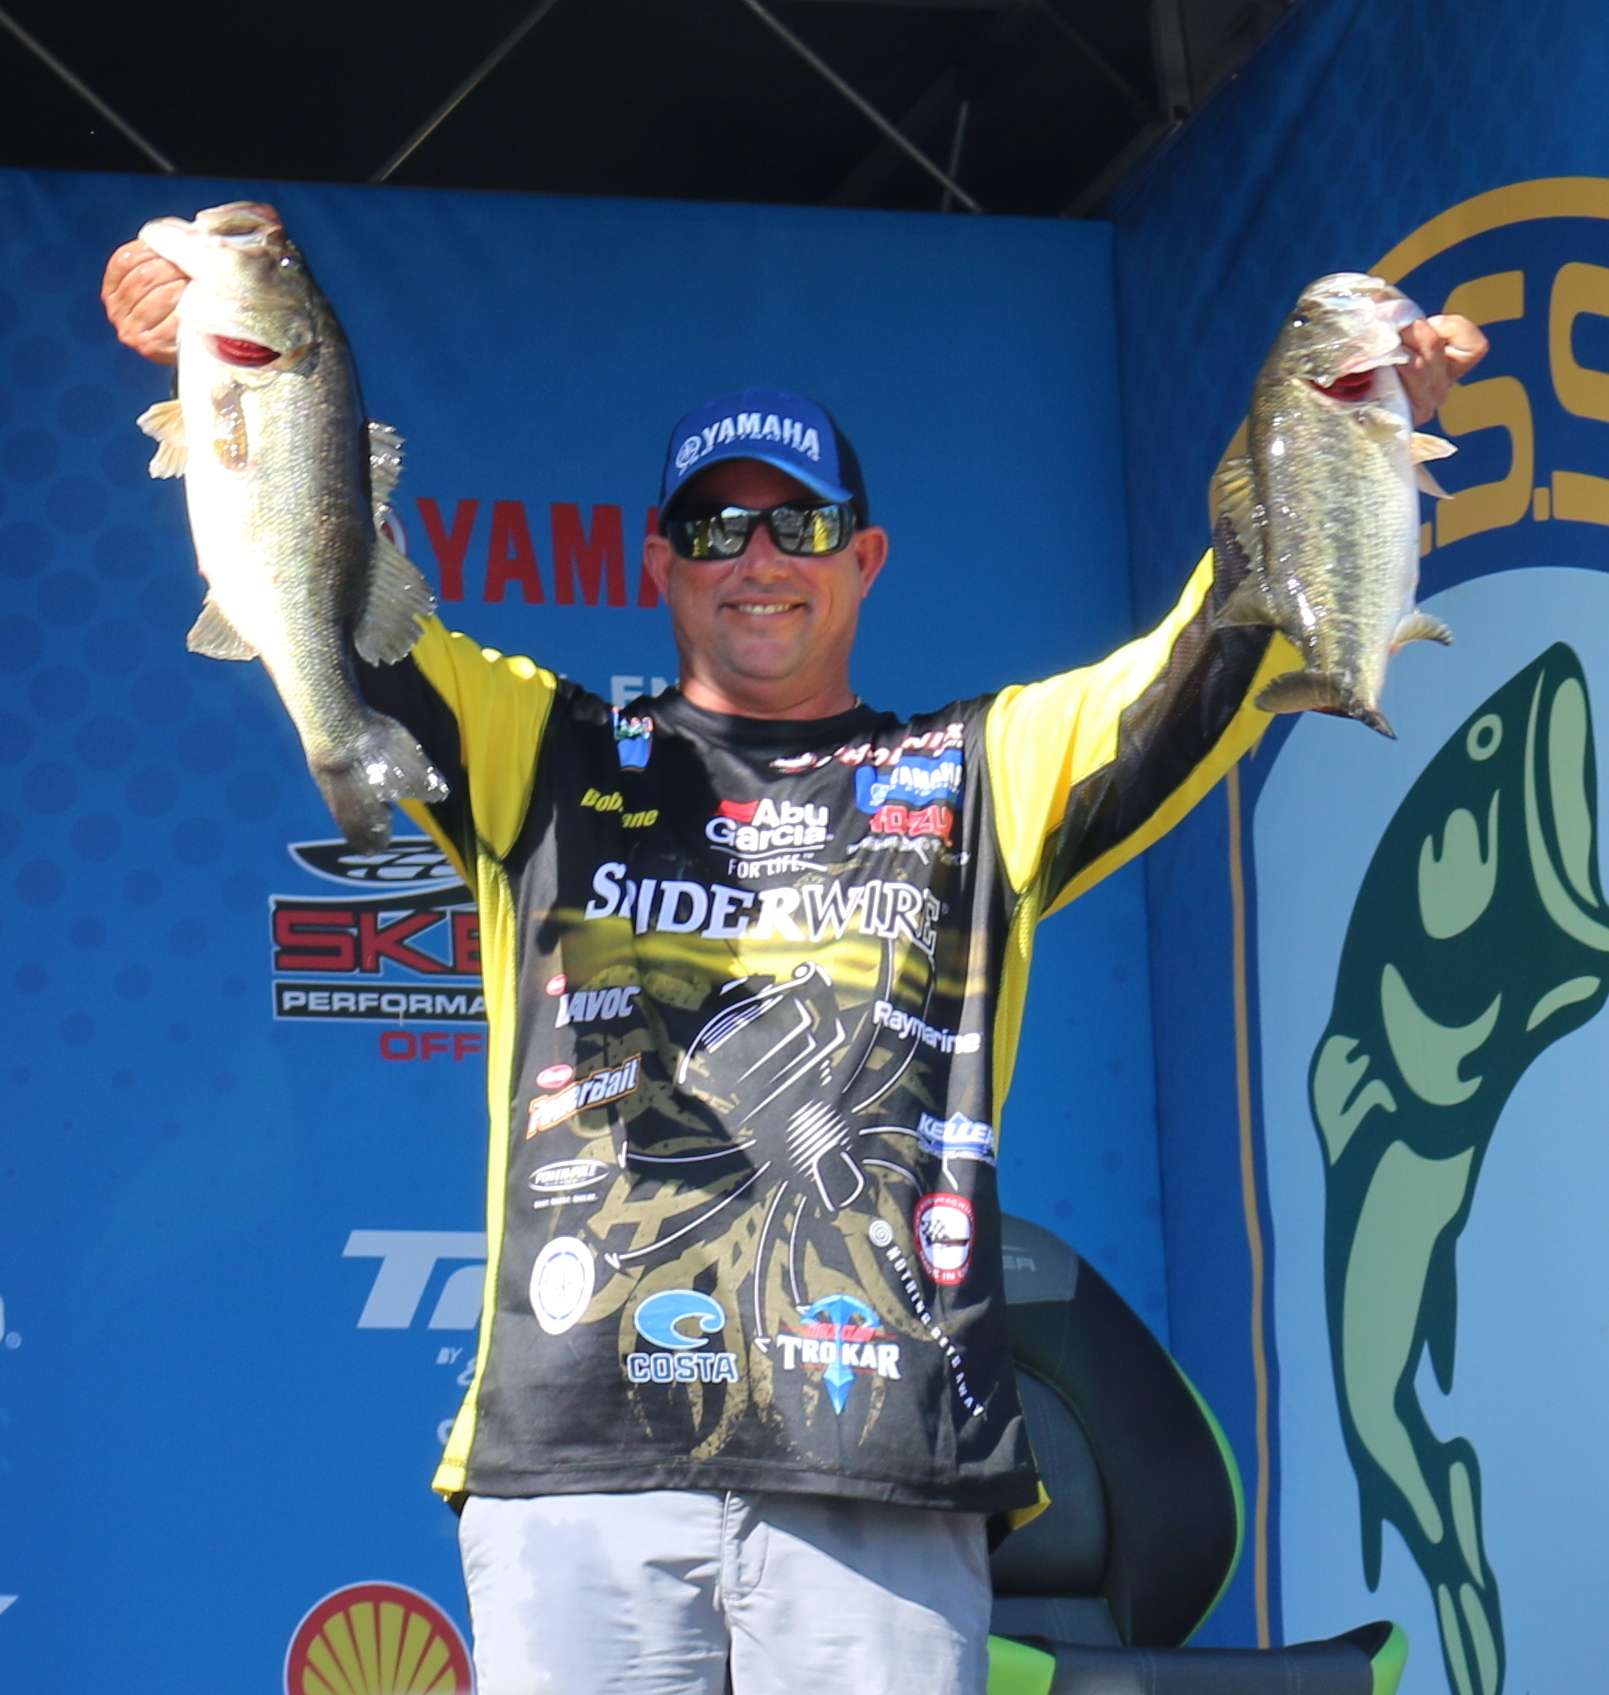 Bobby has a solid final day on Lake Okeechobee and moves up from 12th to seventh place.